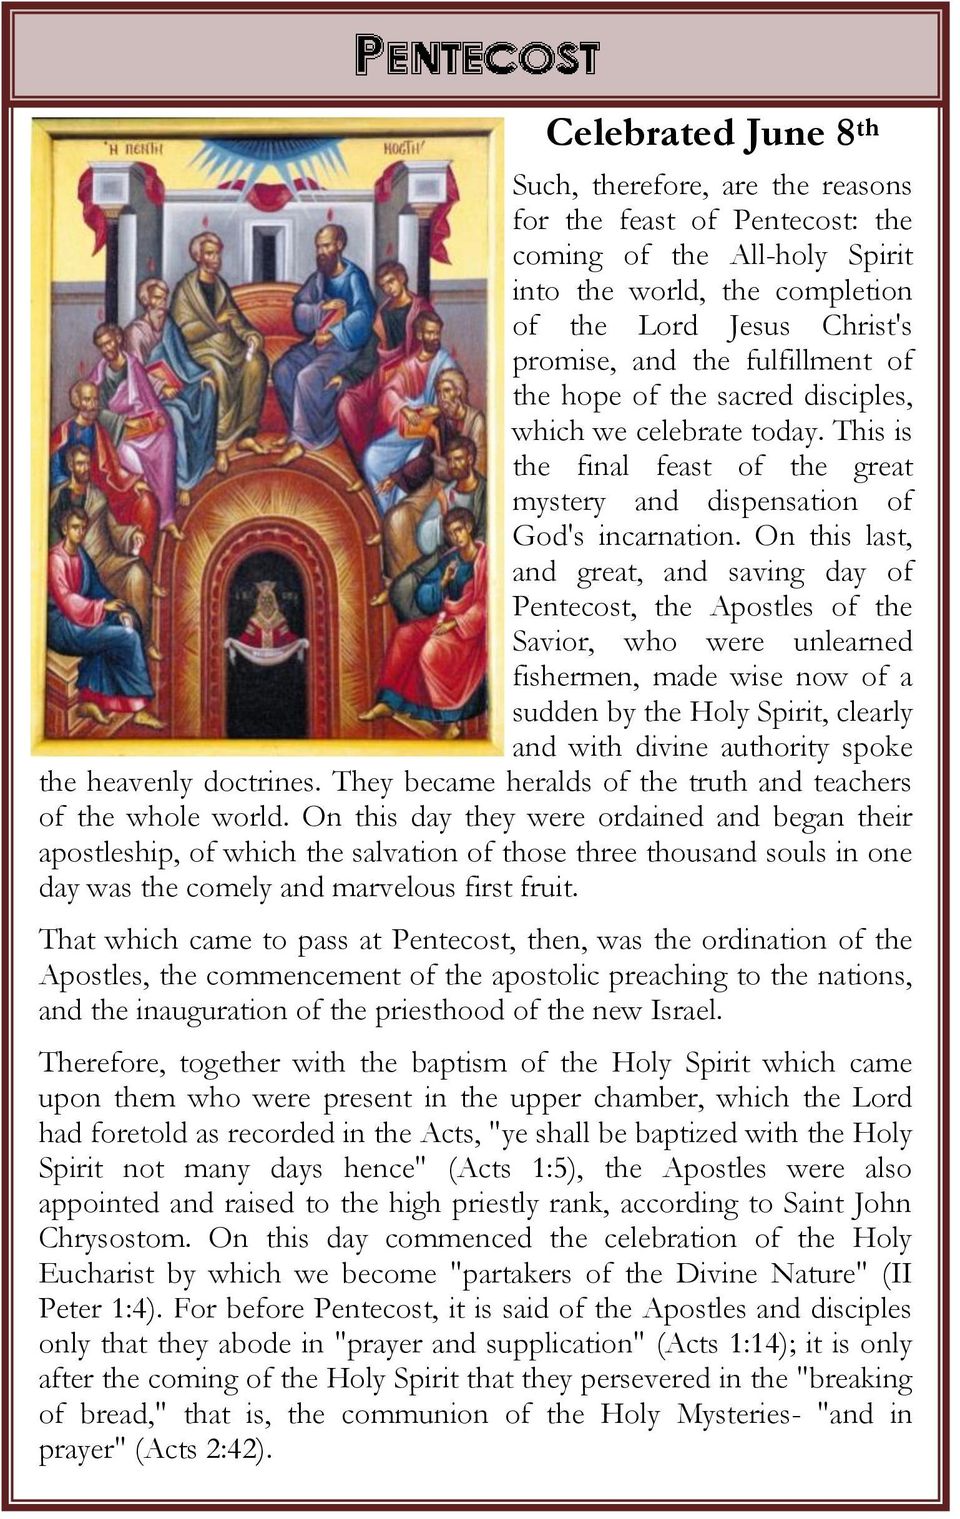 On this last, and great, and saving day of Pentecost, the Apostles of the Savior, who were unlearned fishermen, made wise now of a sudden by the Holy Spirit, clearly and with divine authority spoke